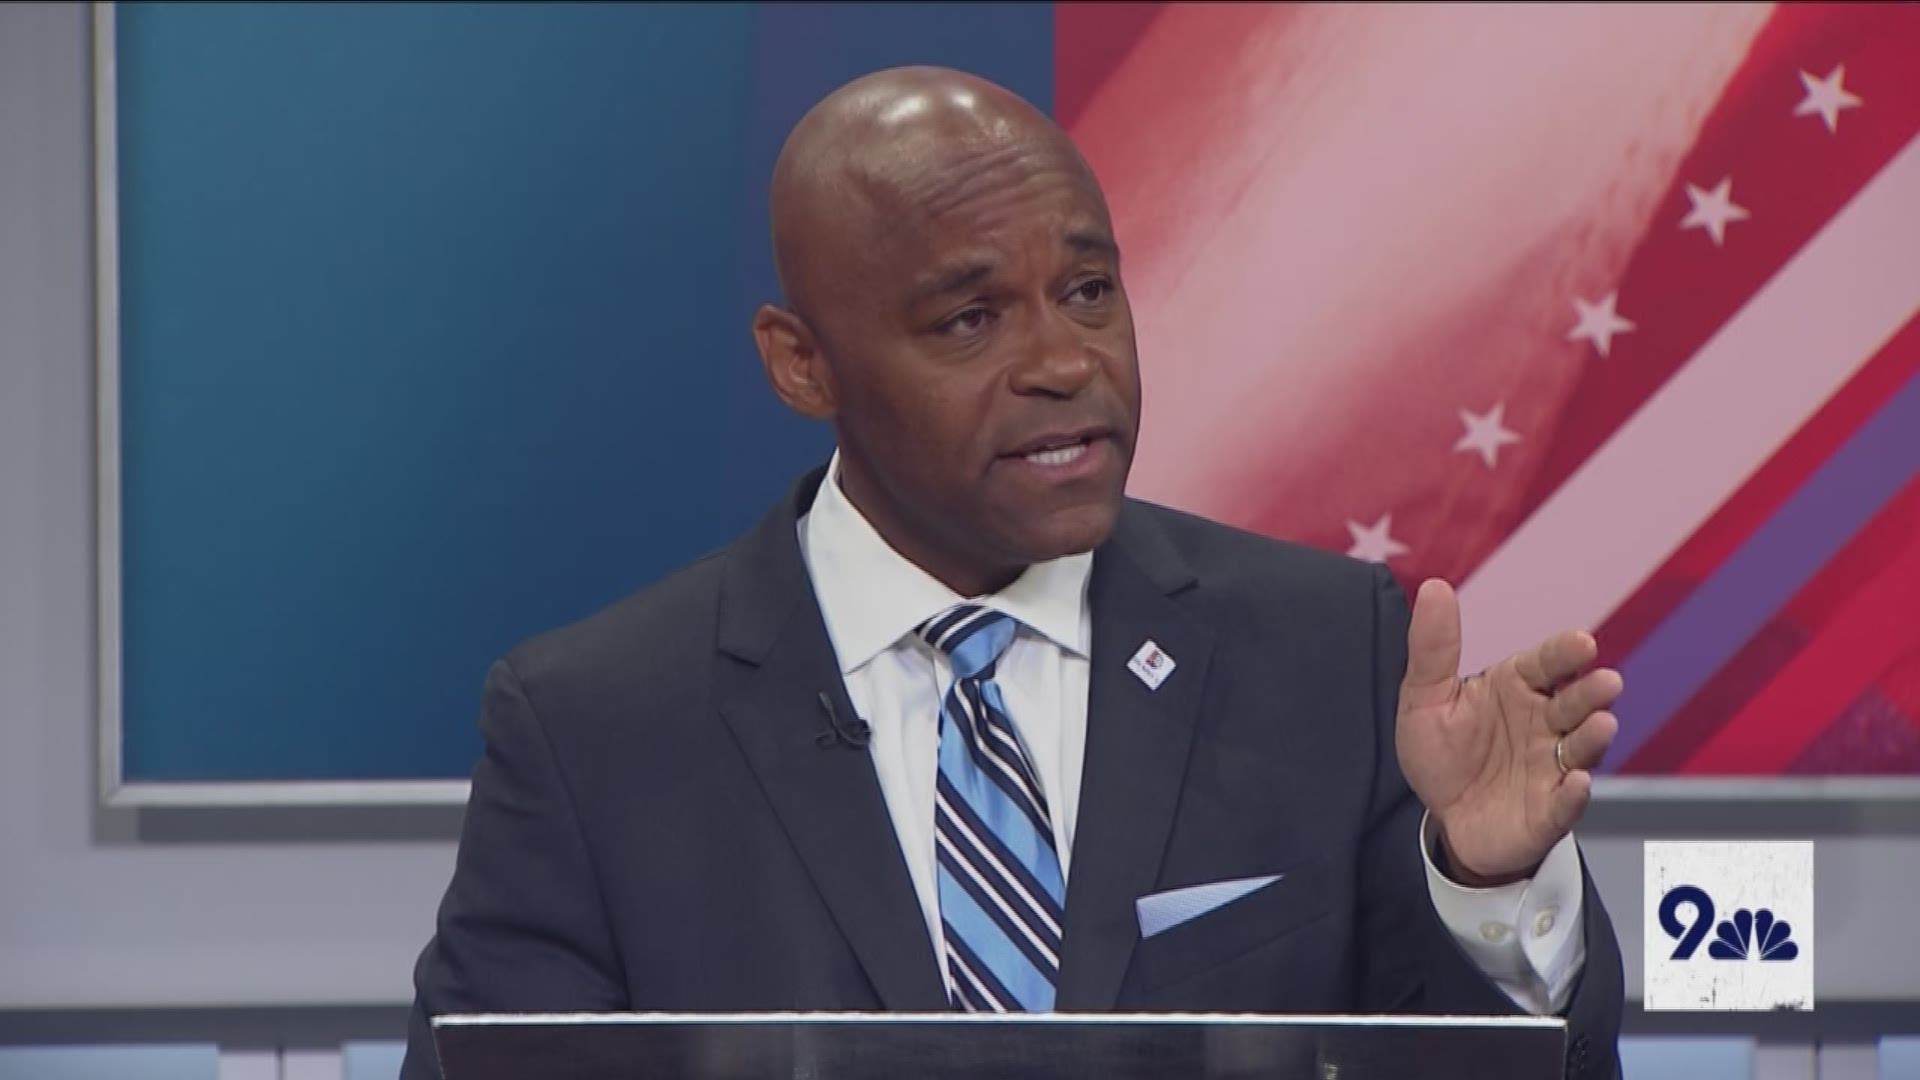 Incumbent Mayor Michael Hancock shares whether he thinks a runoff is a sign voters question his leadership during a 9NEWS mayoral debate.